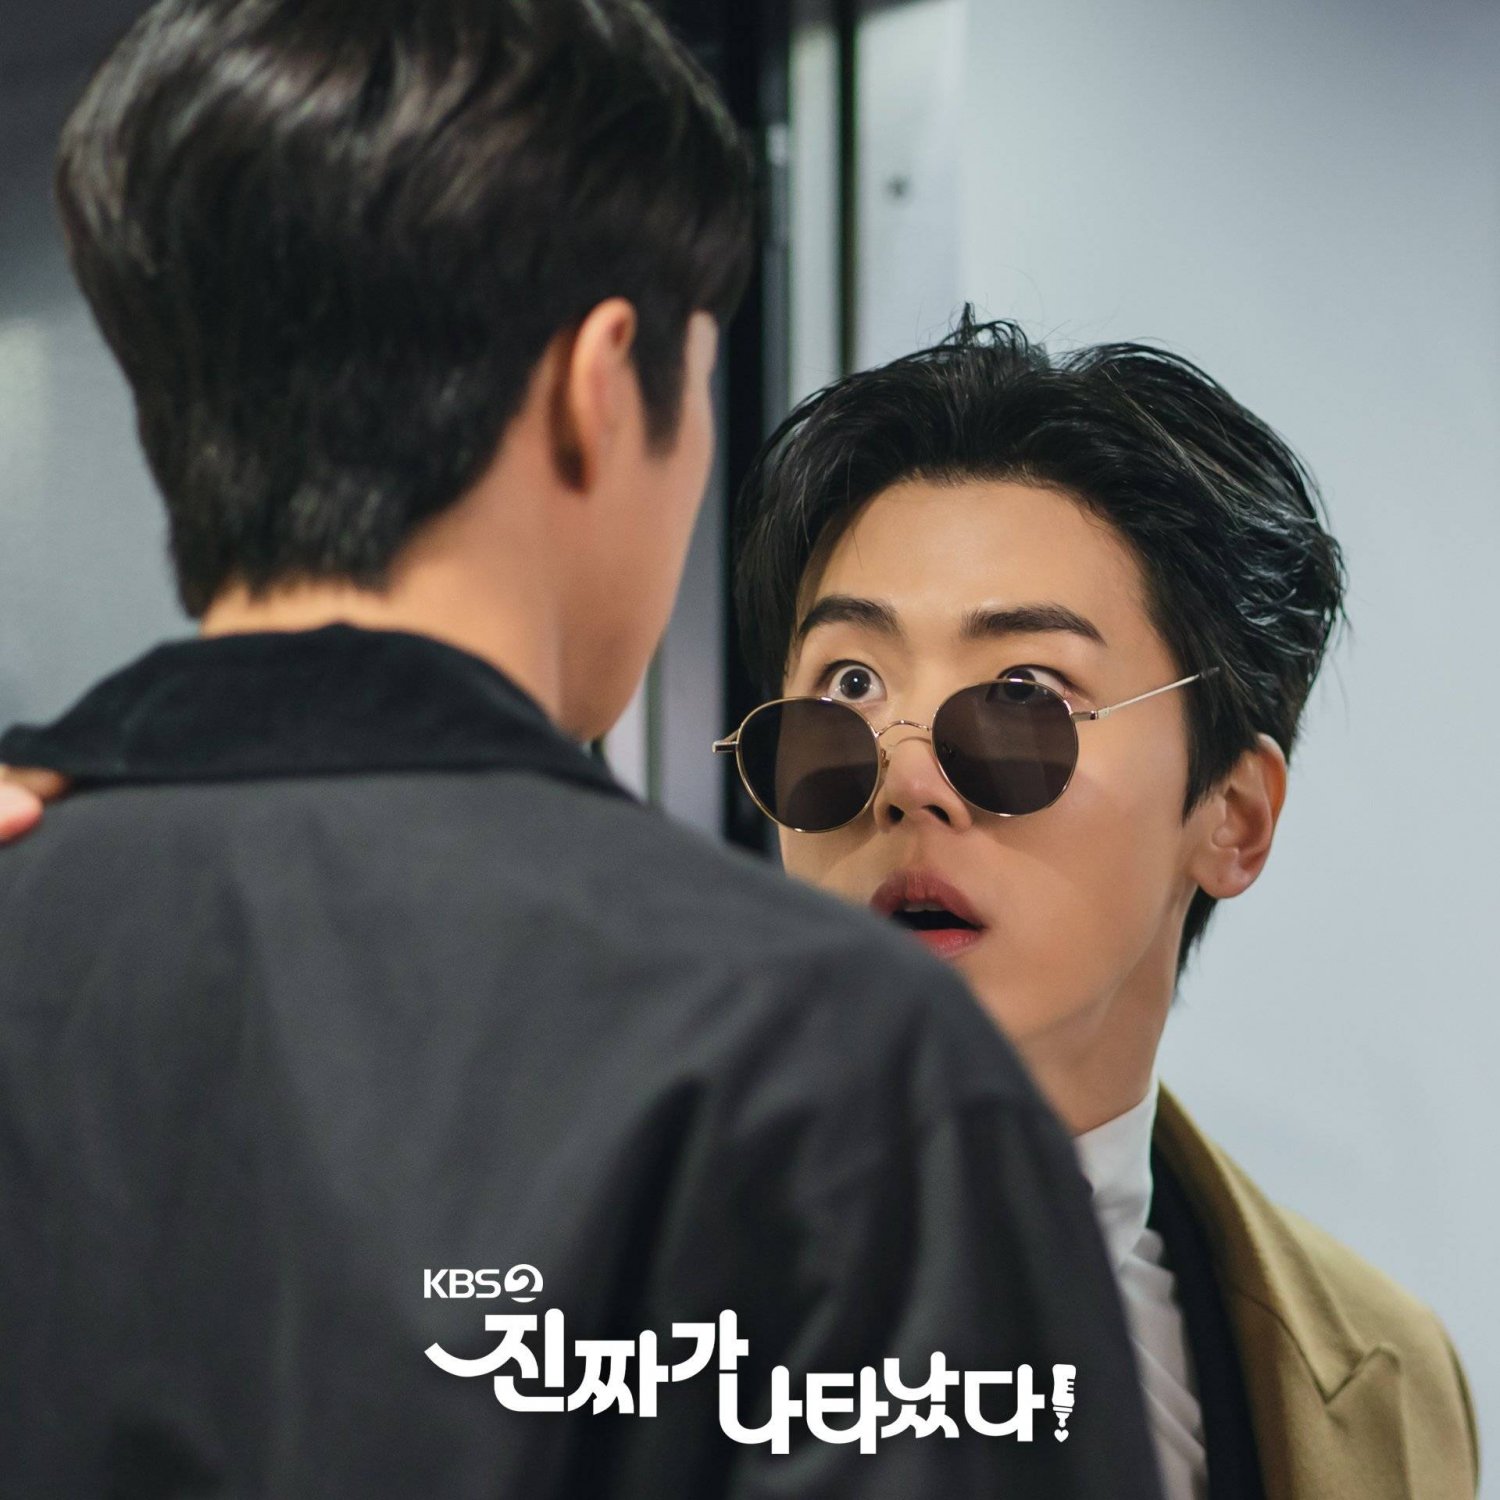 Photos New Behind The Scenes Images Added For The Korean Drama The Real Has Come Hancinema